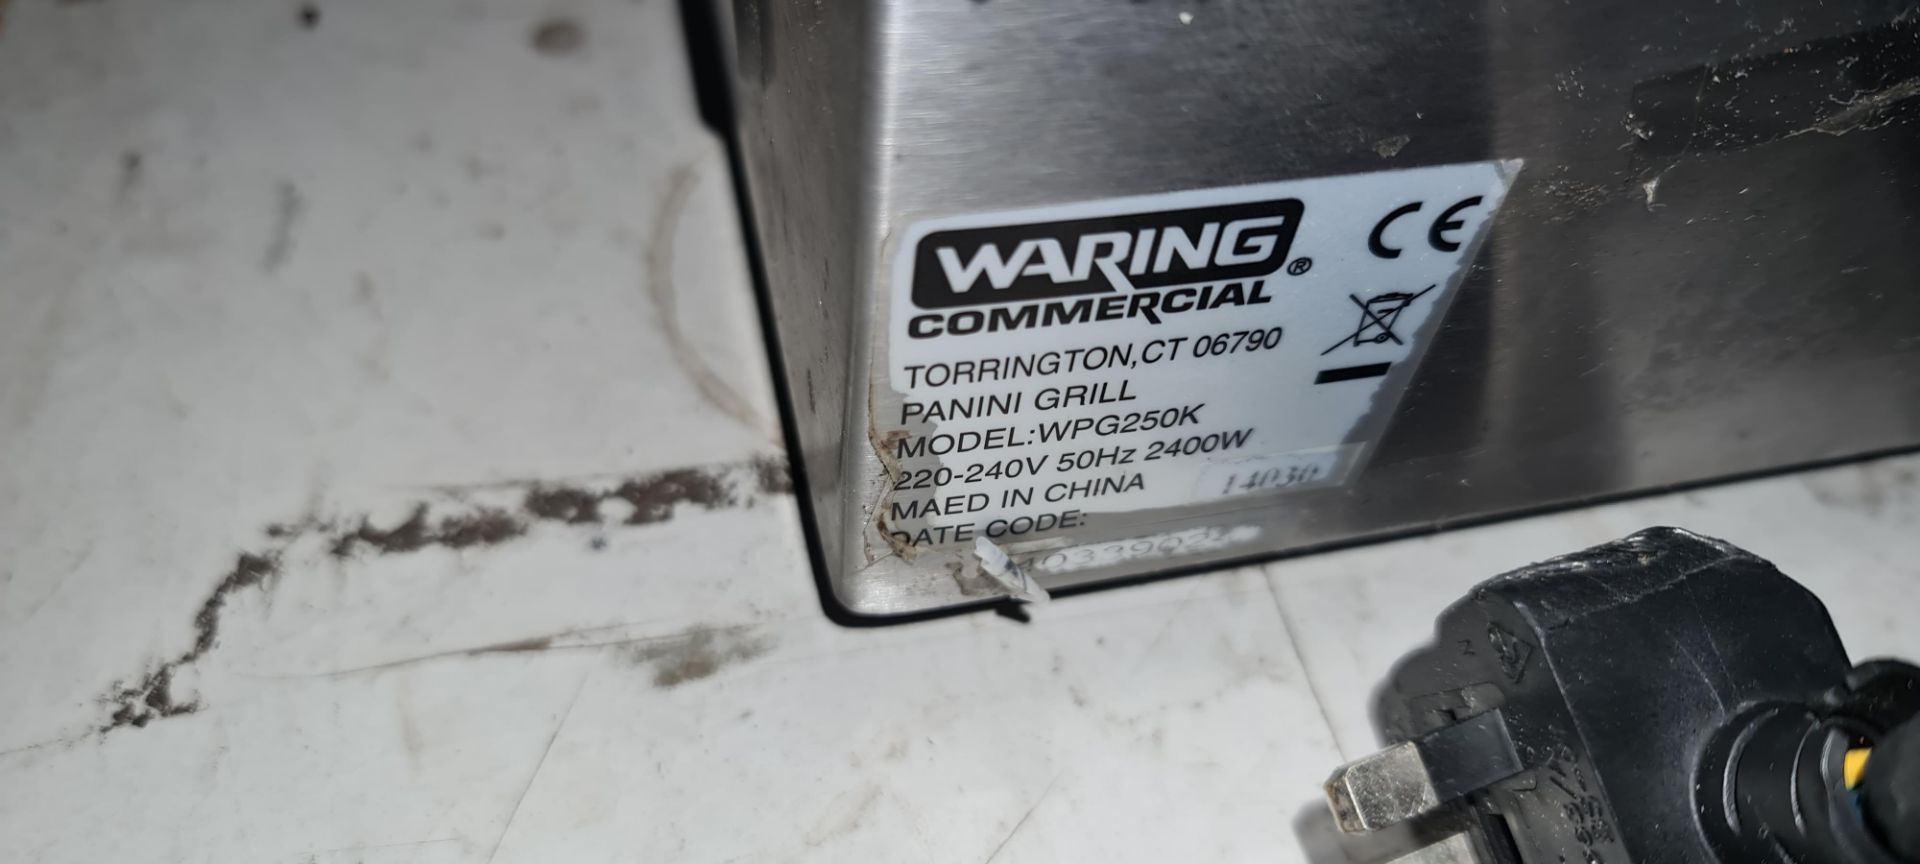 Waring commercial panini maker - Image 7 of 7